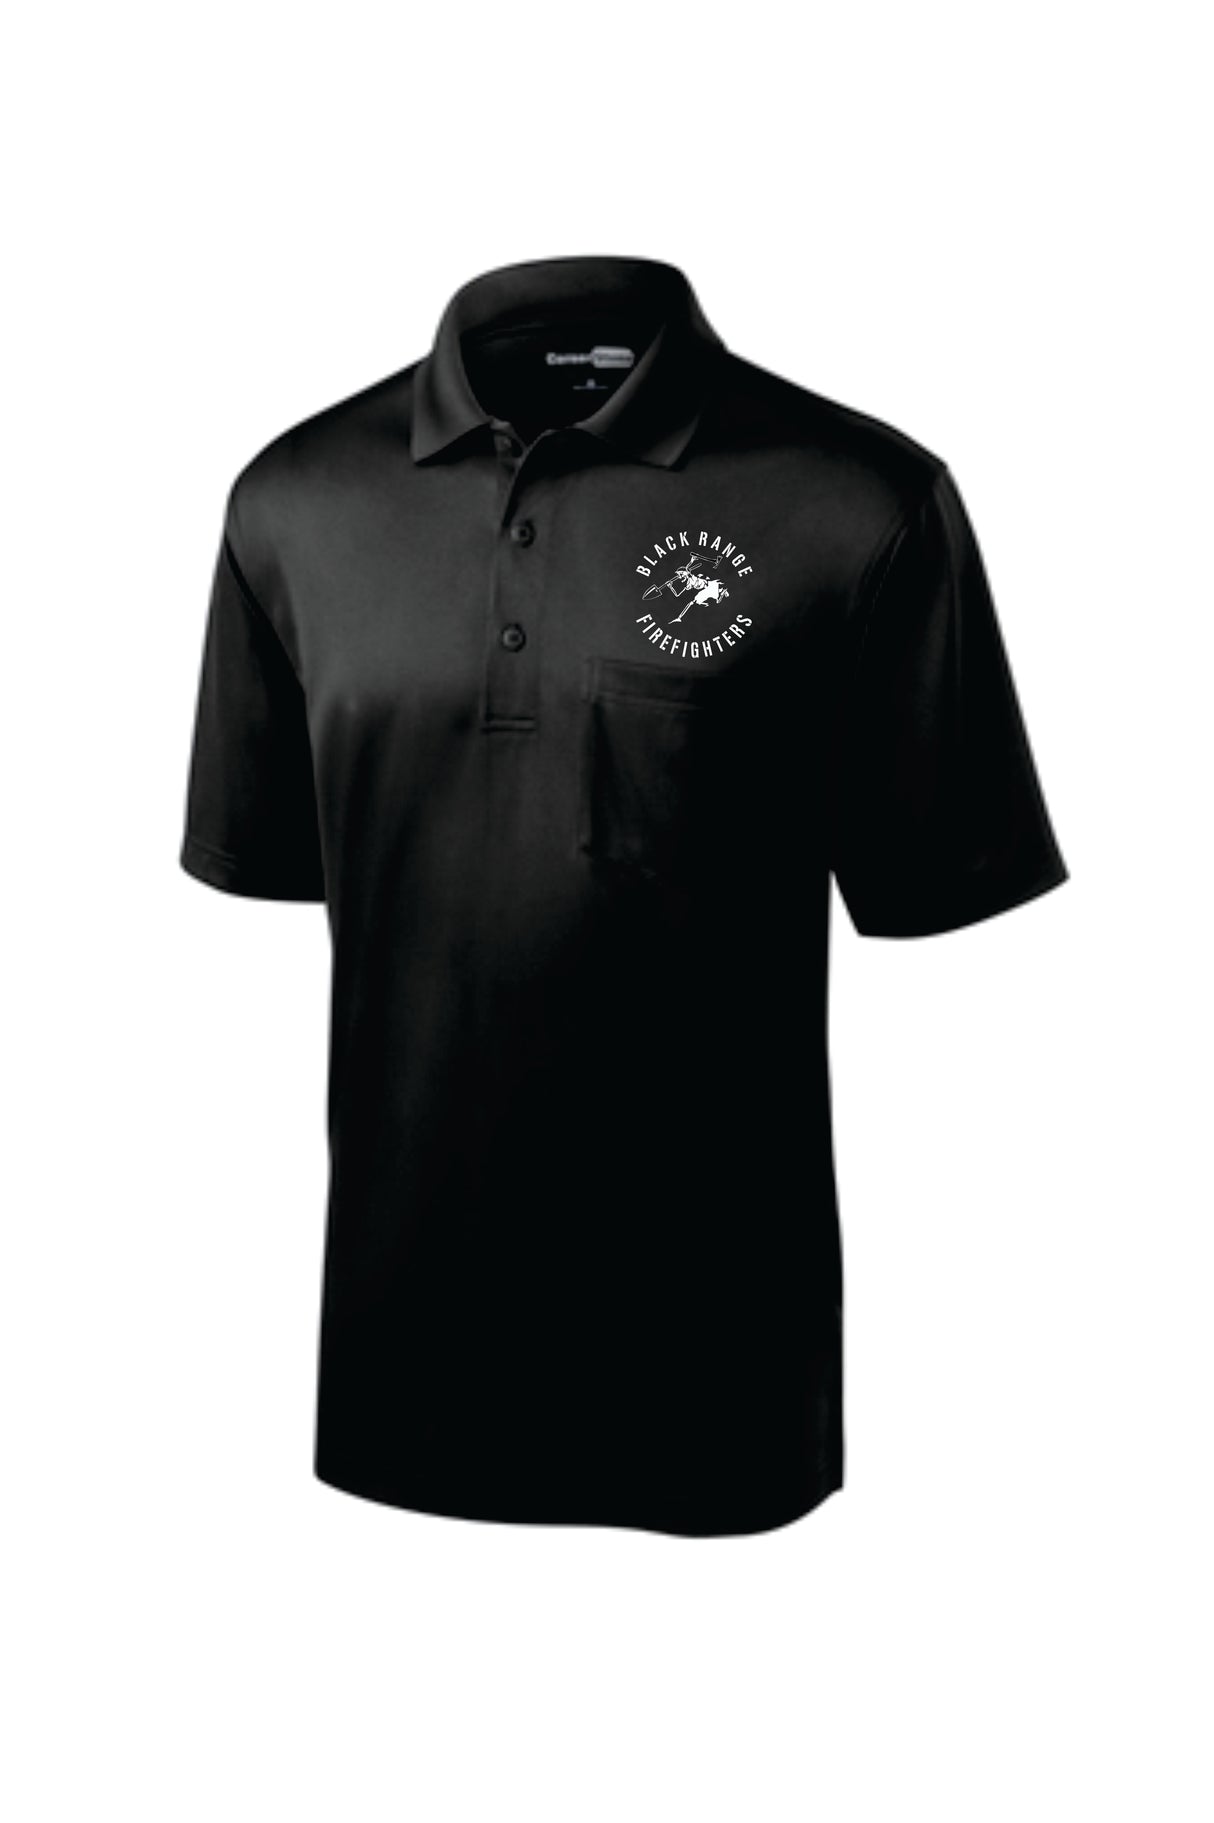 Black Range Fire Snag-Proof Pocket Pique Polo With Skully